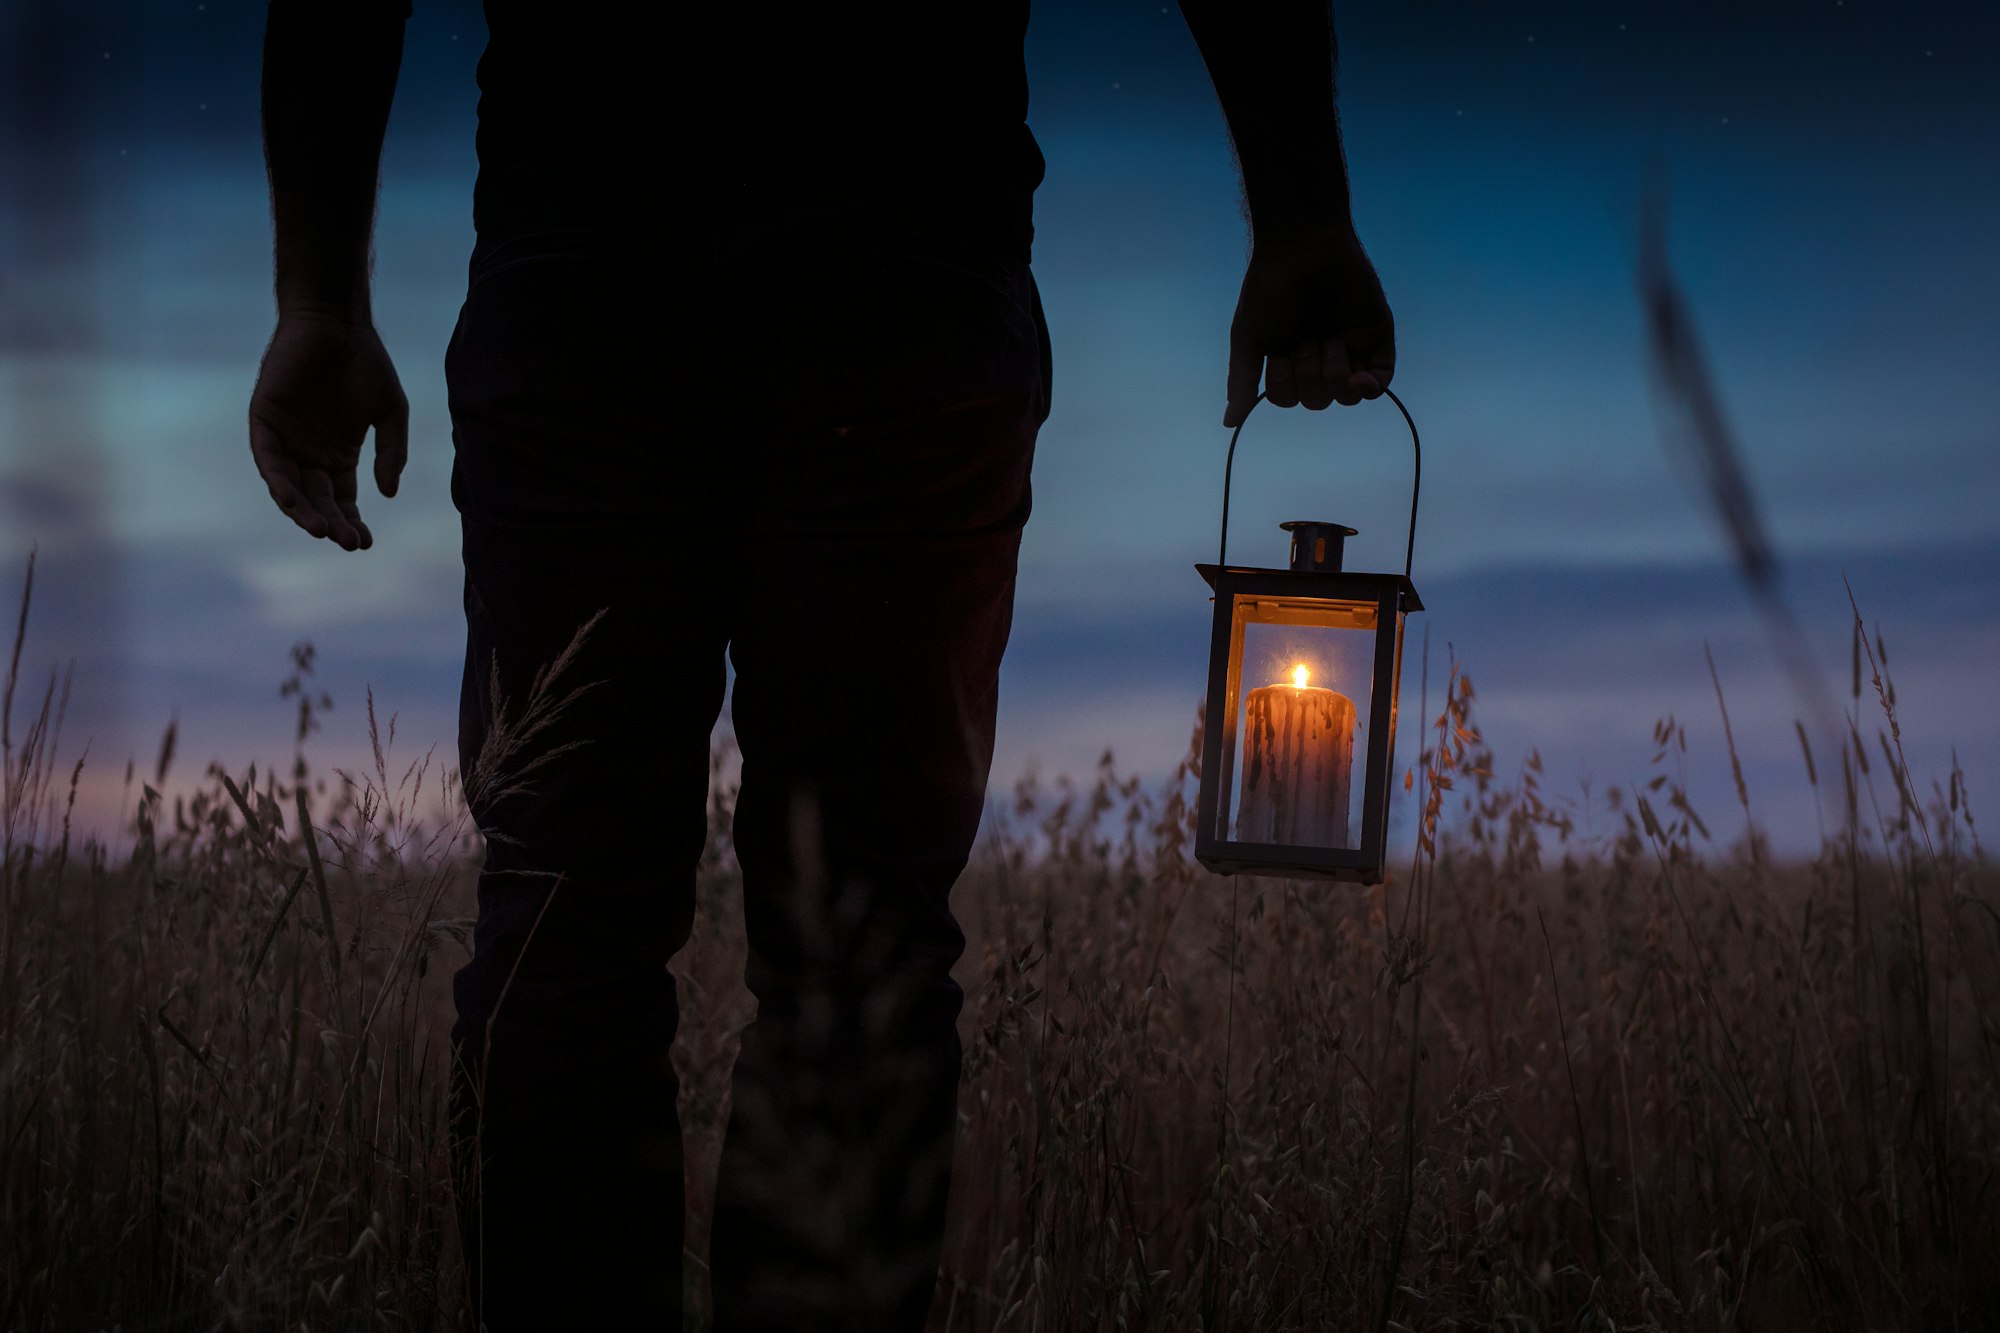 Best Camping Lanterns Of 2022 | The Best Lantern For Your Campsite Will Surprise You!